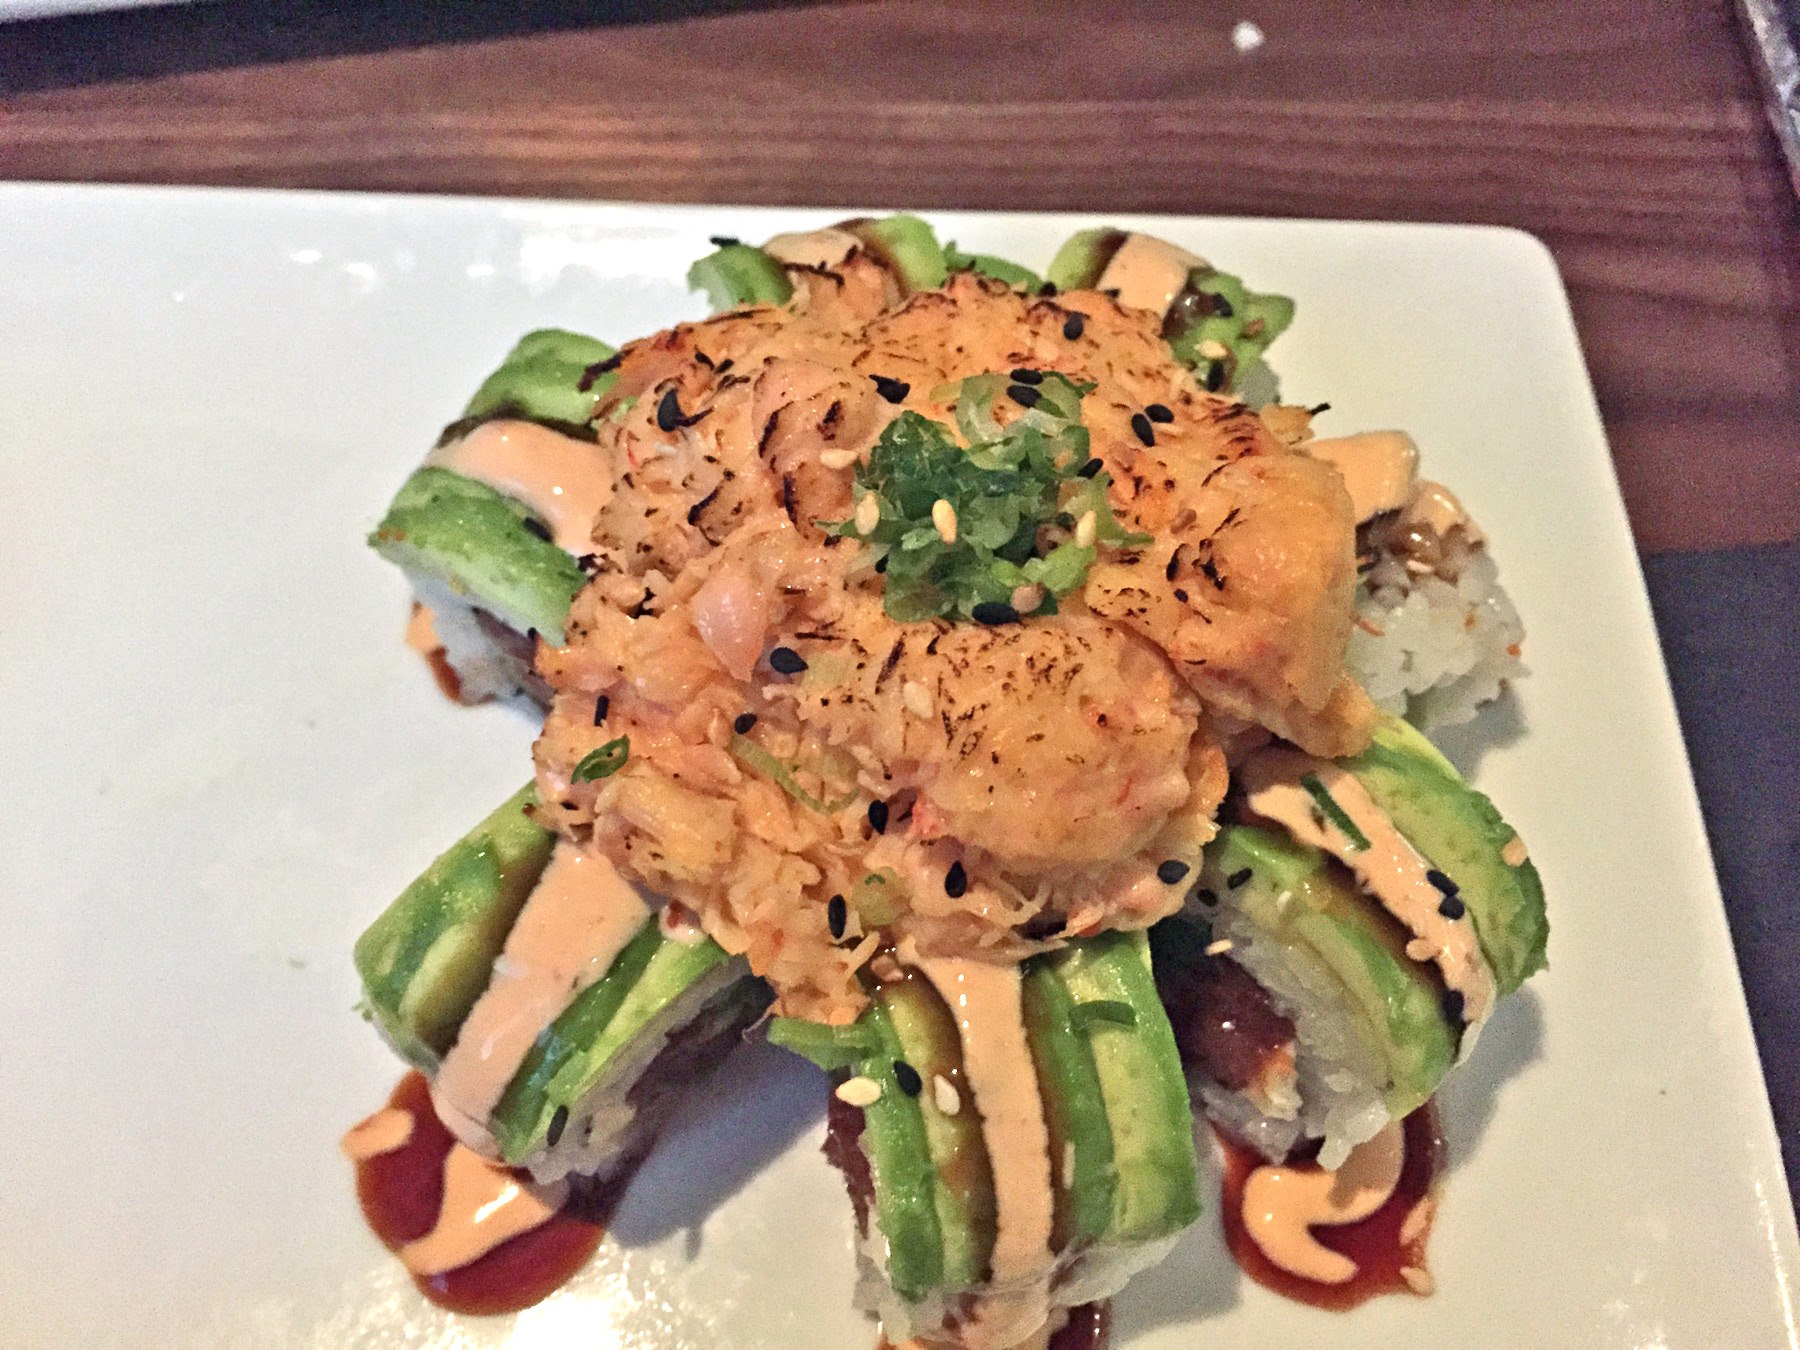 Category 5 Roll